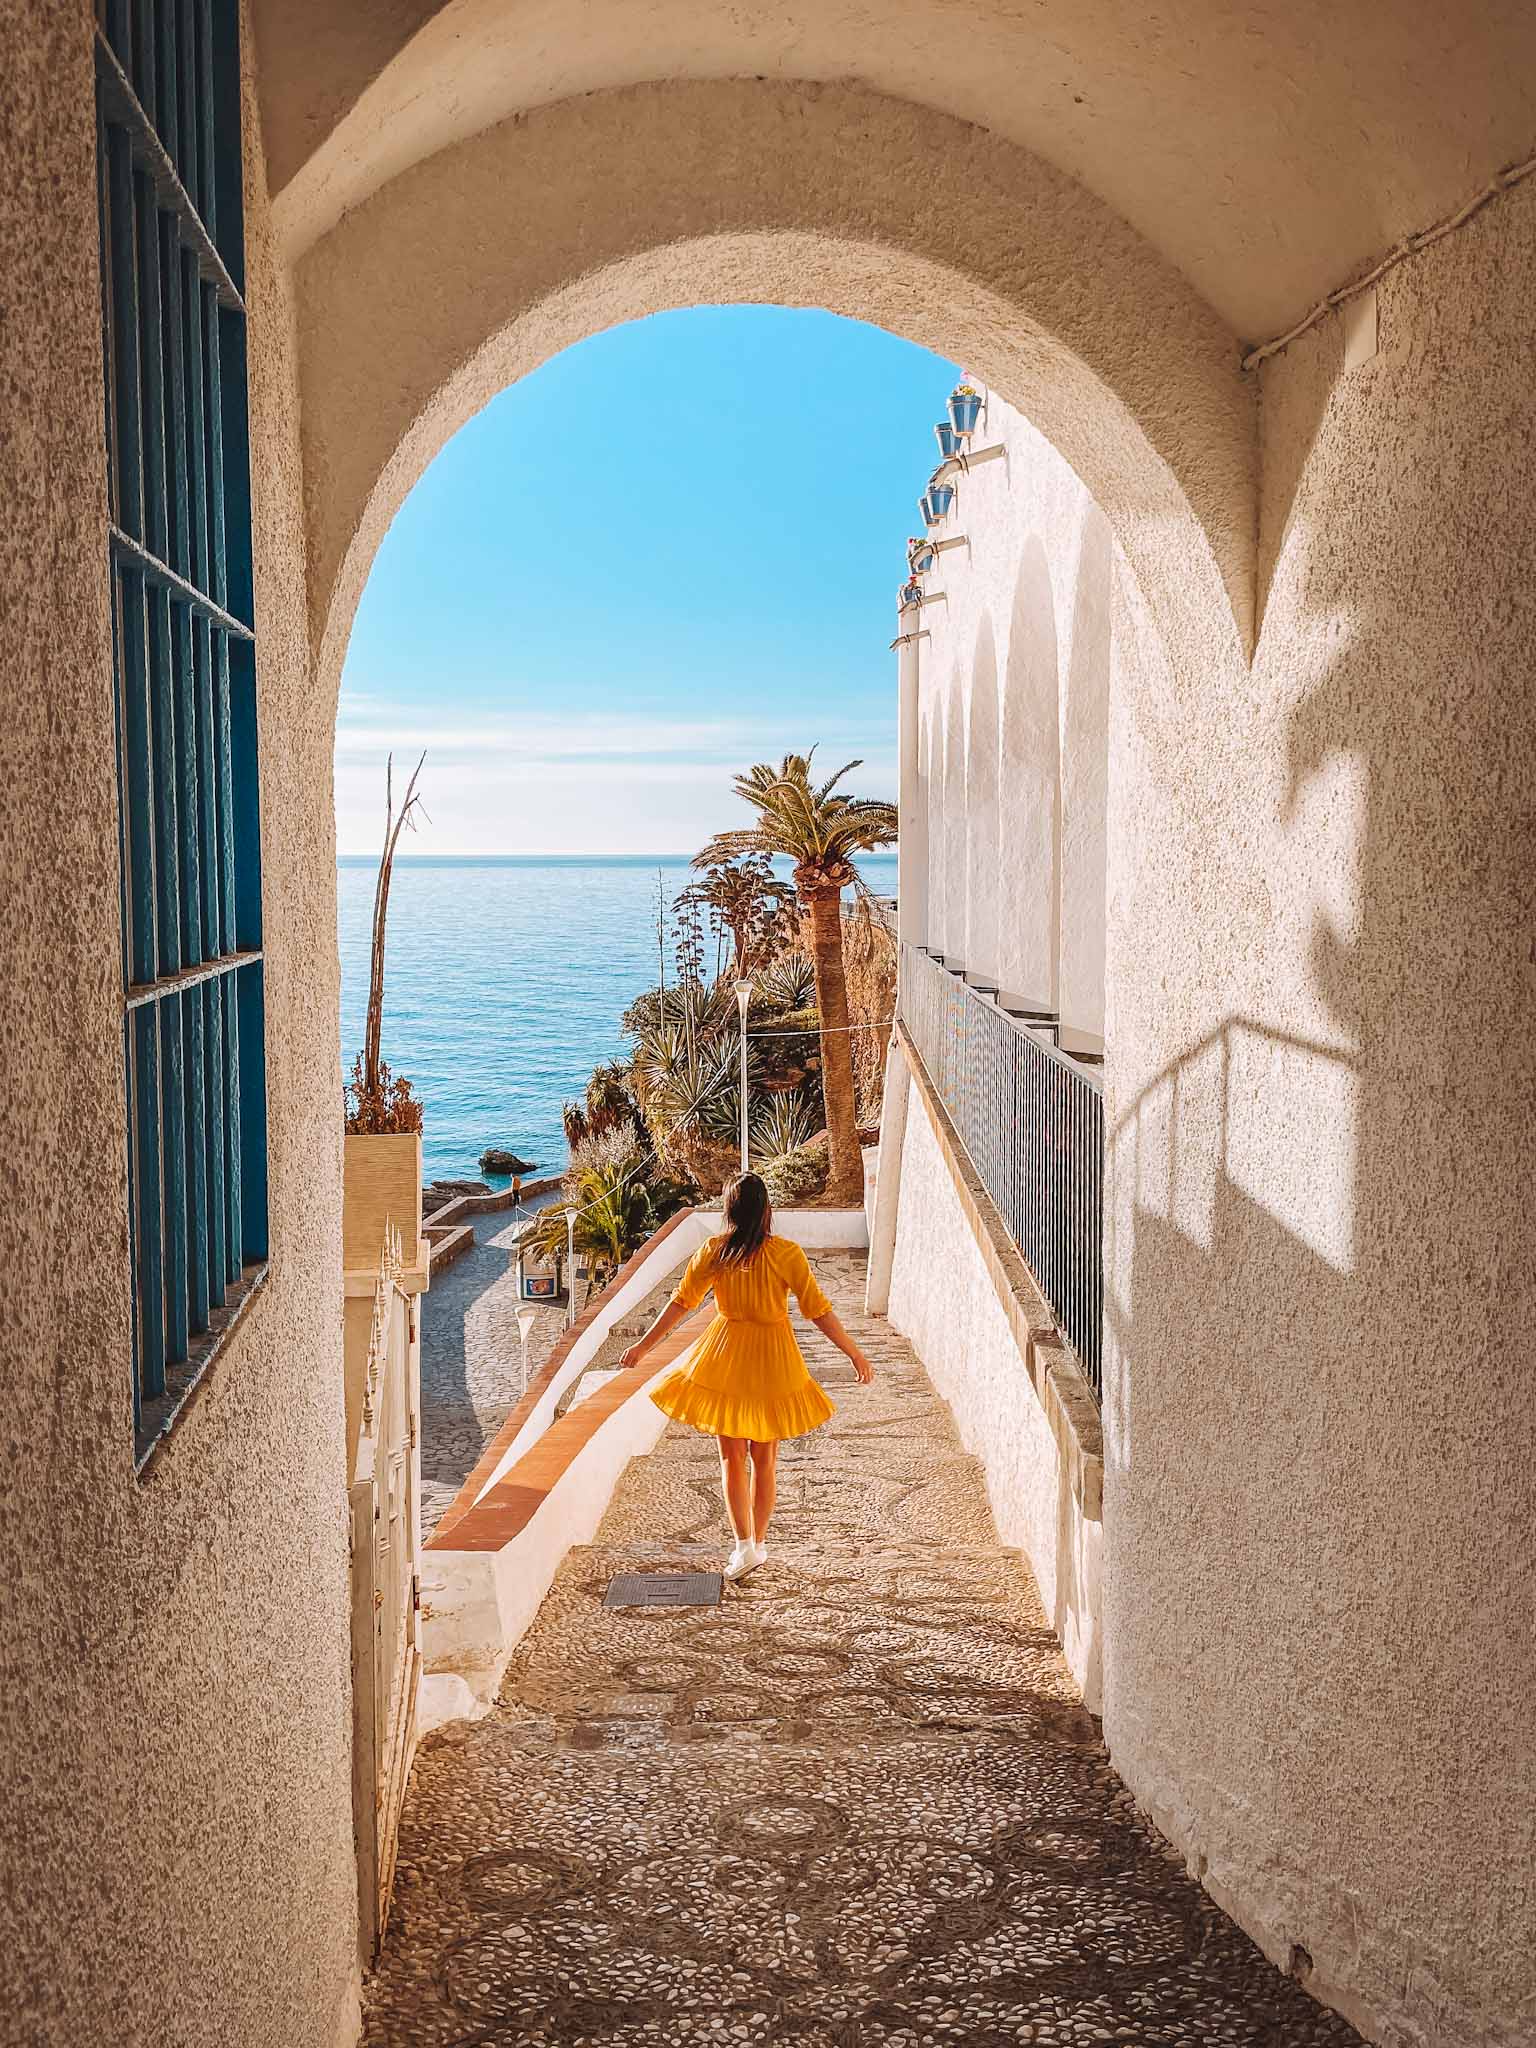 Best Instagram spots of the most beautiful places in Nerja, Spain